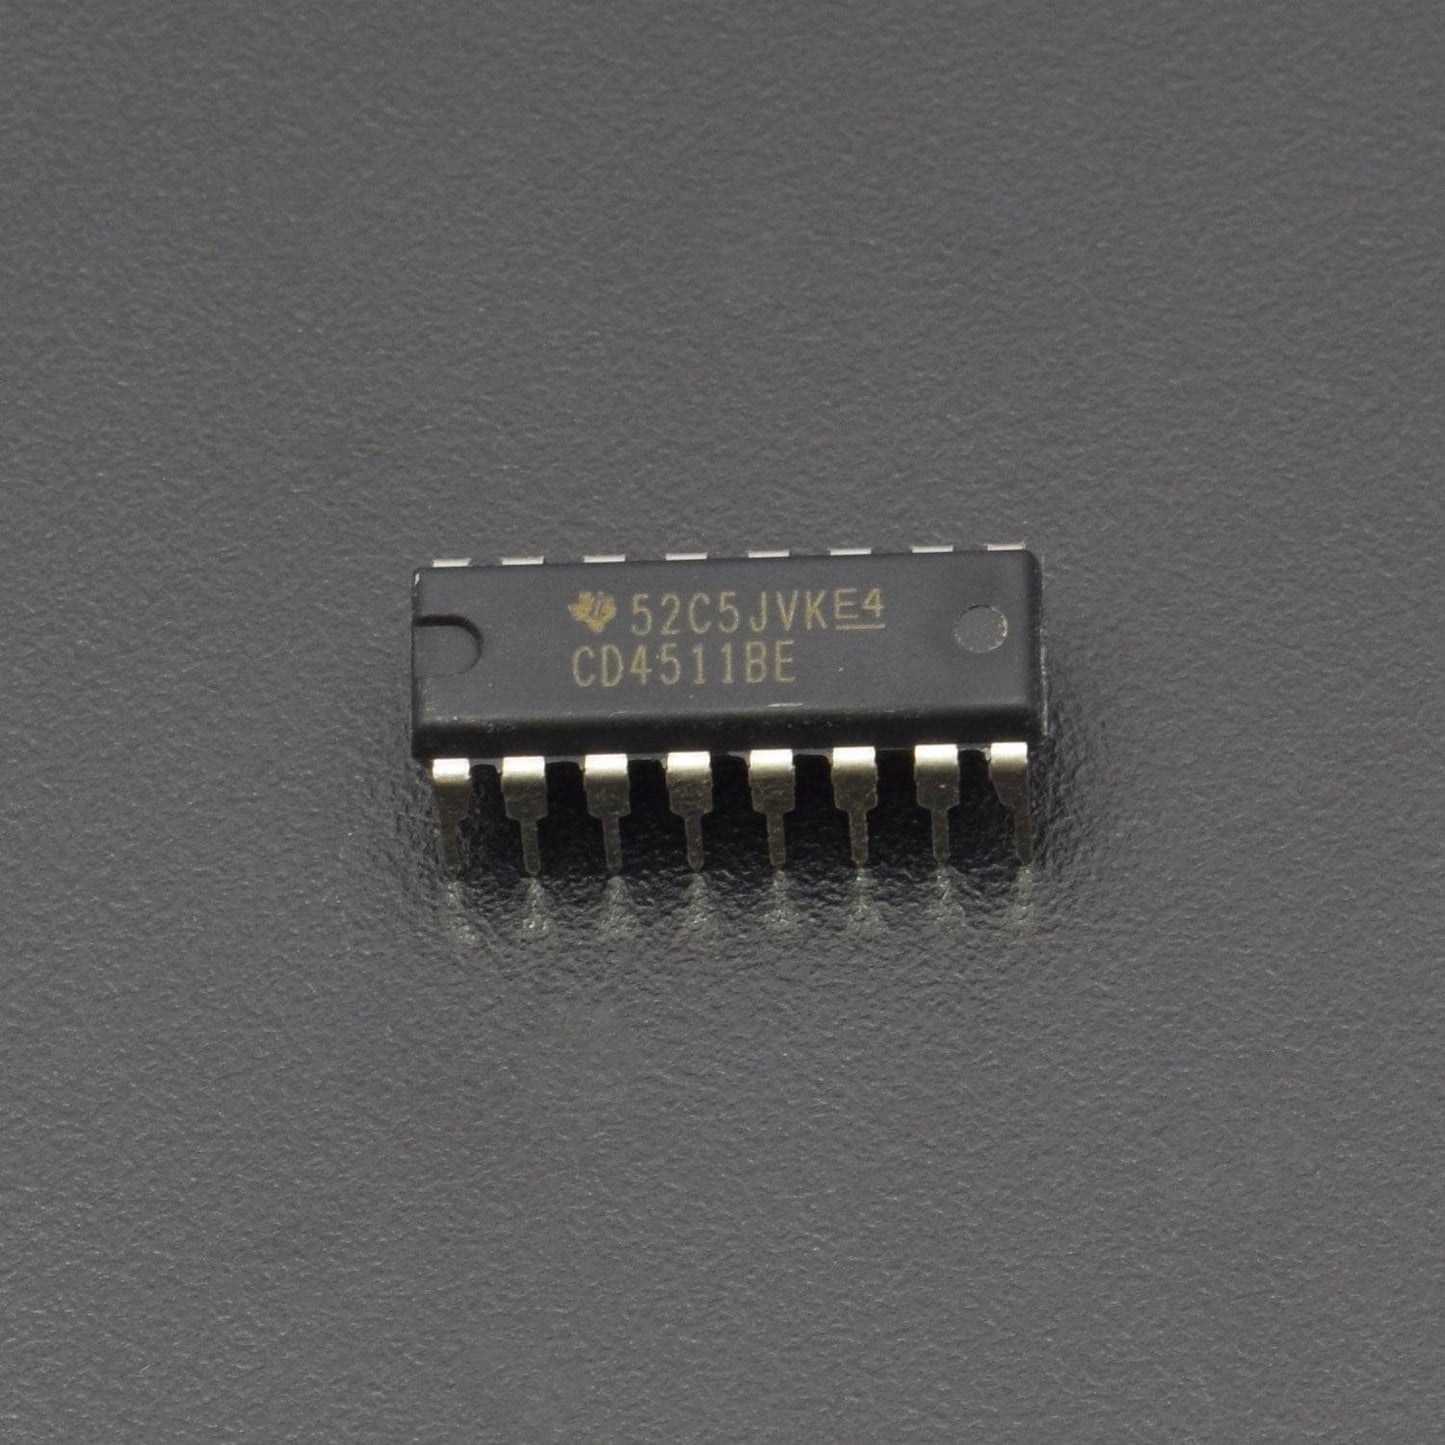 CD4511 BE 4511 CMOS BCD to 7 segment Latch Decoder IC - AC084 - REES52